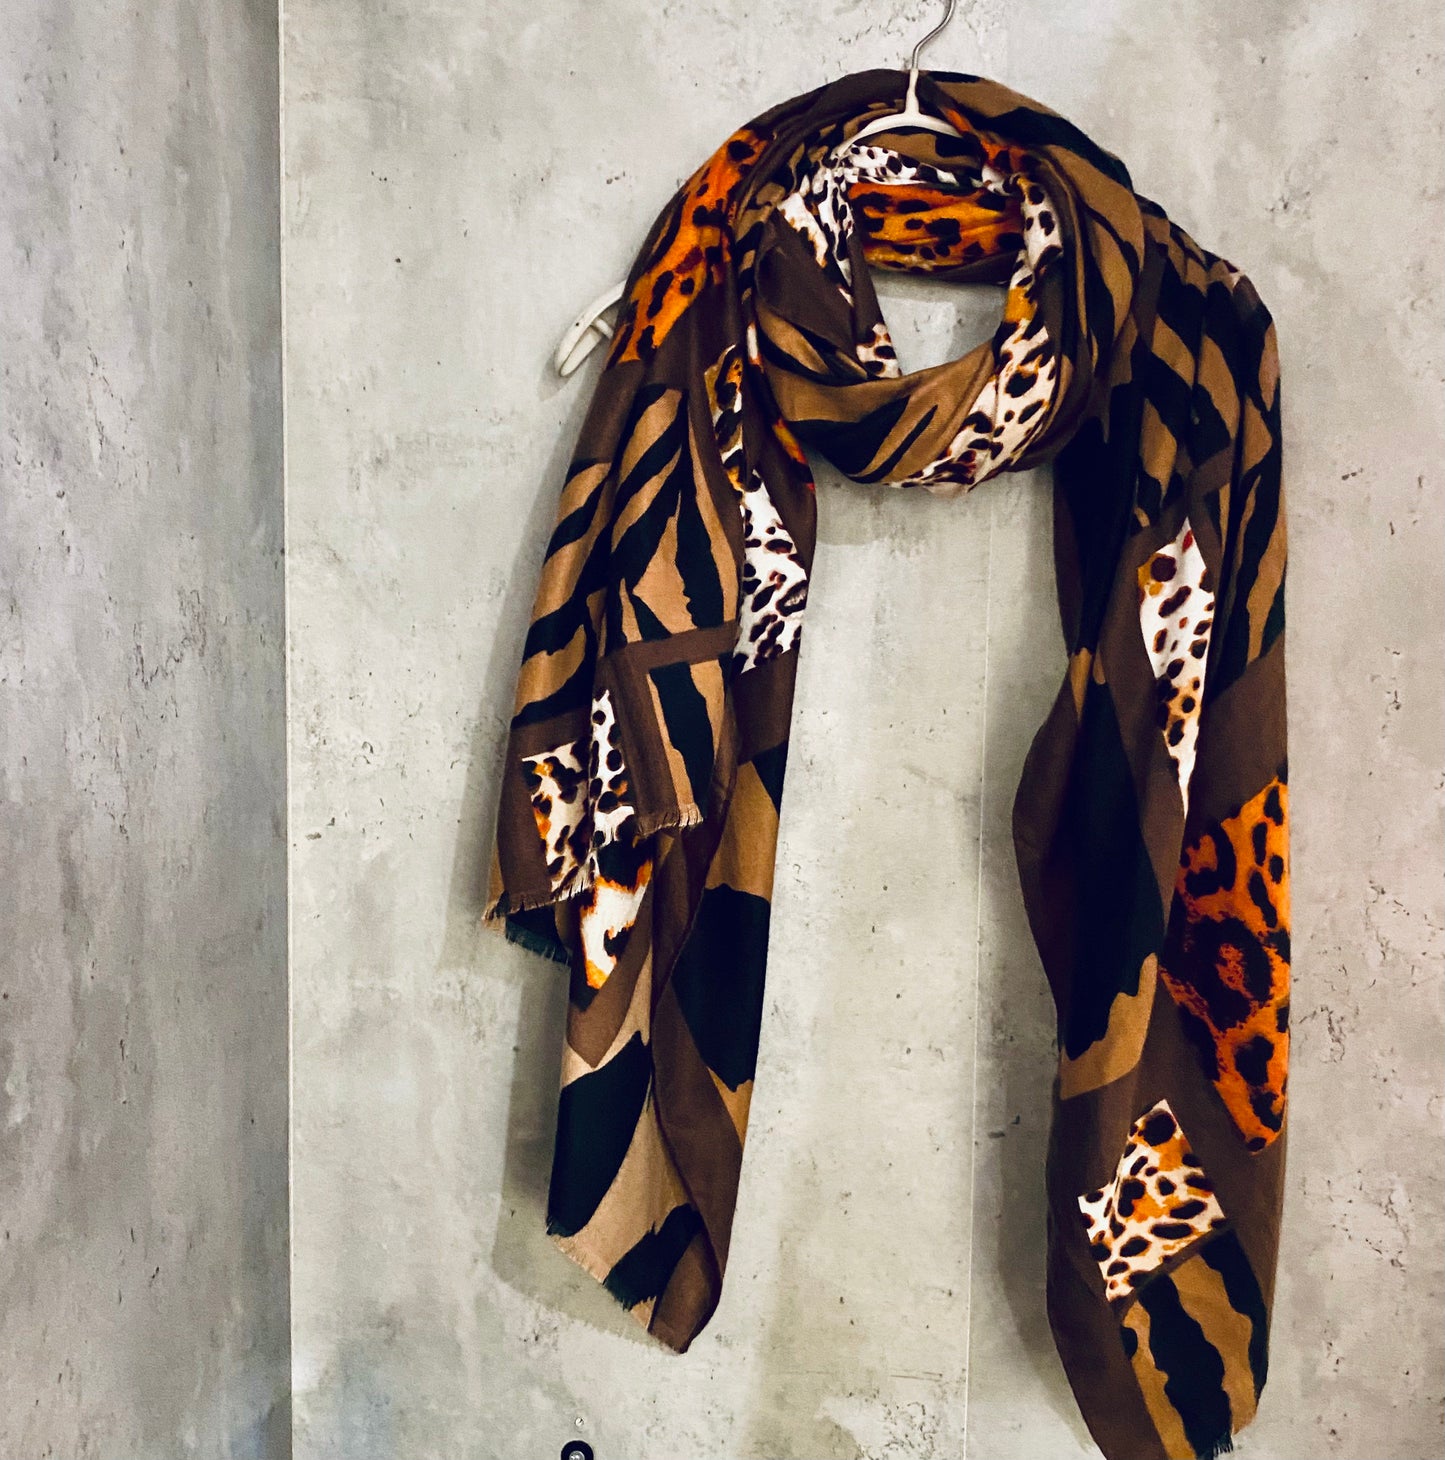 Wild Animal Skin Pattern Brown Beige Cotton Scarf/Autumn Scarf/Winter Scarf/Scarf Women/UK Seller/Gifts For Her Birthday/Gifts For Mom